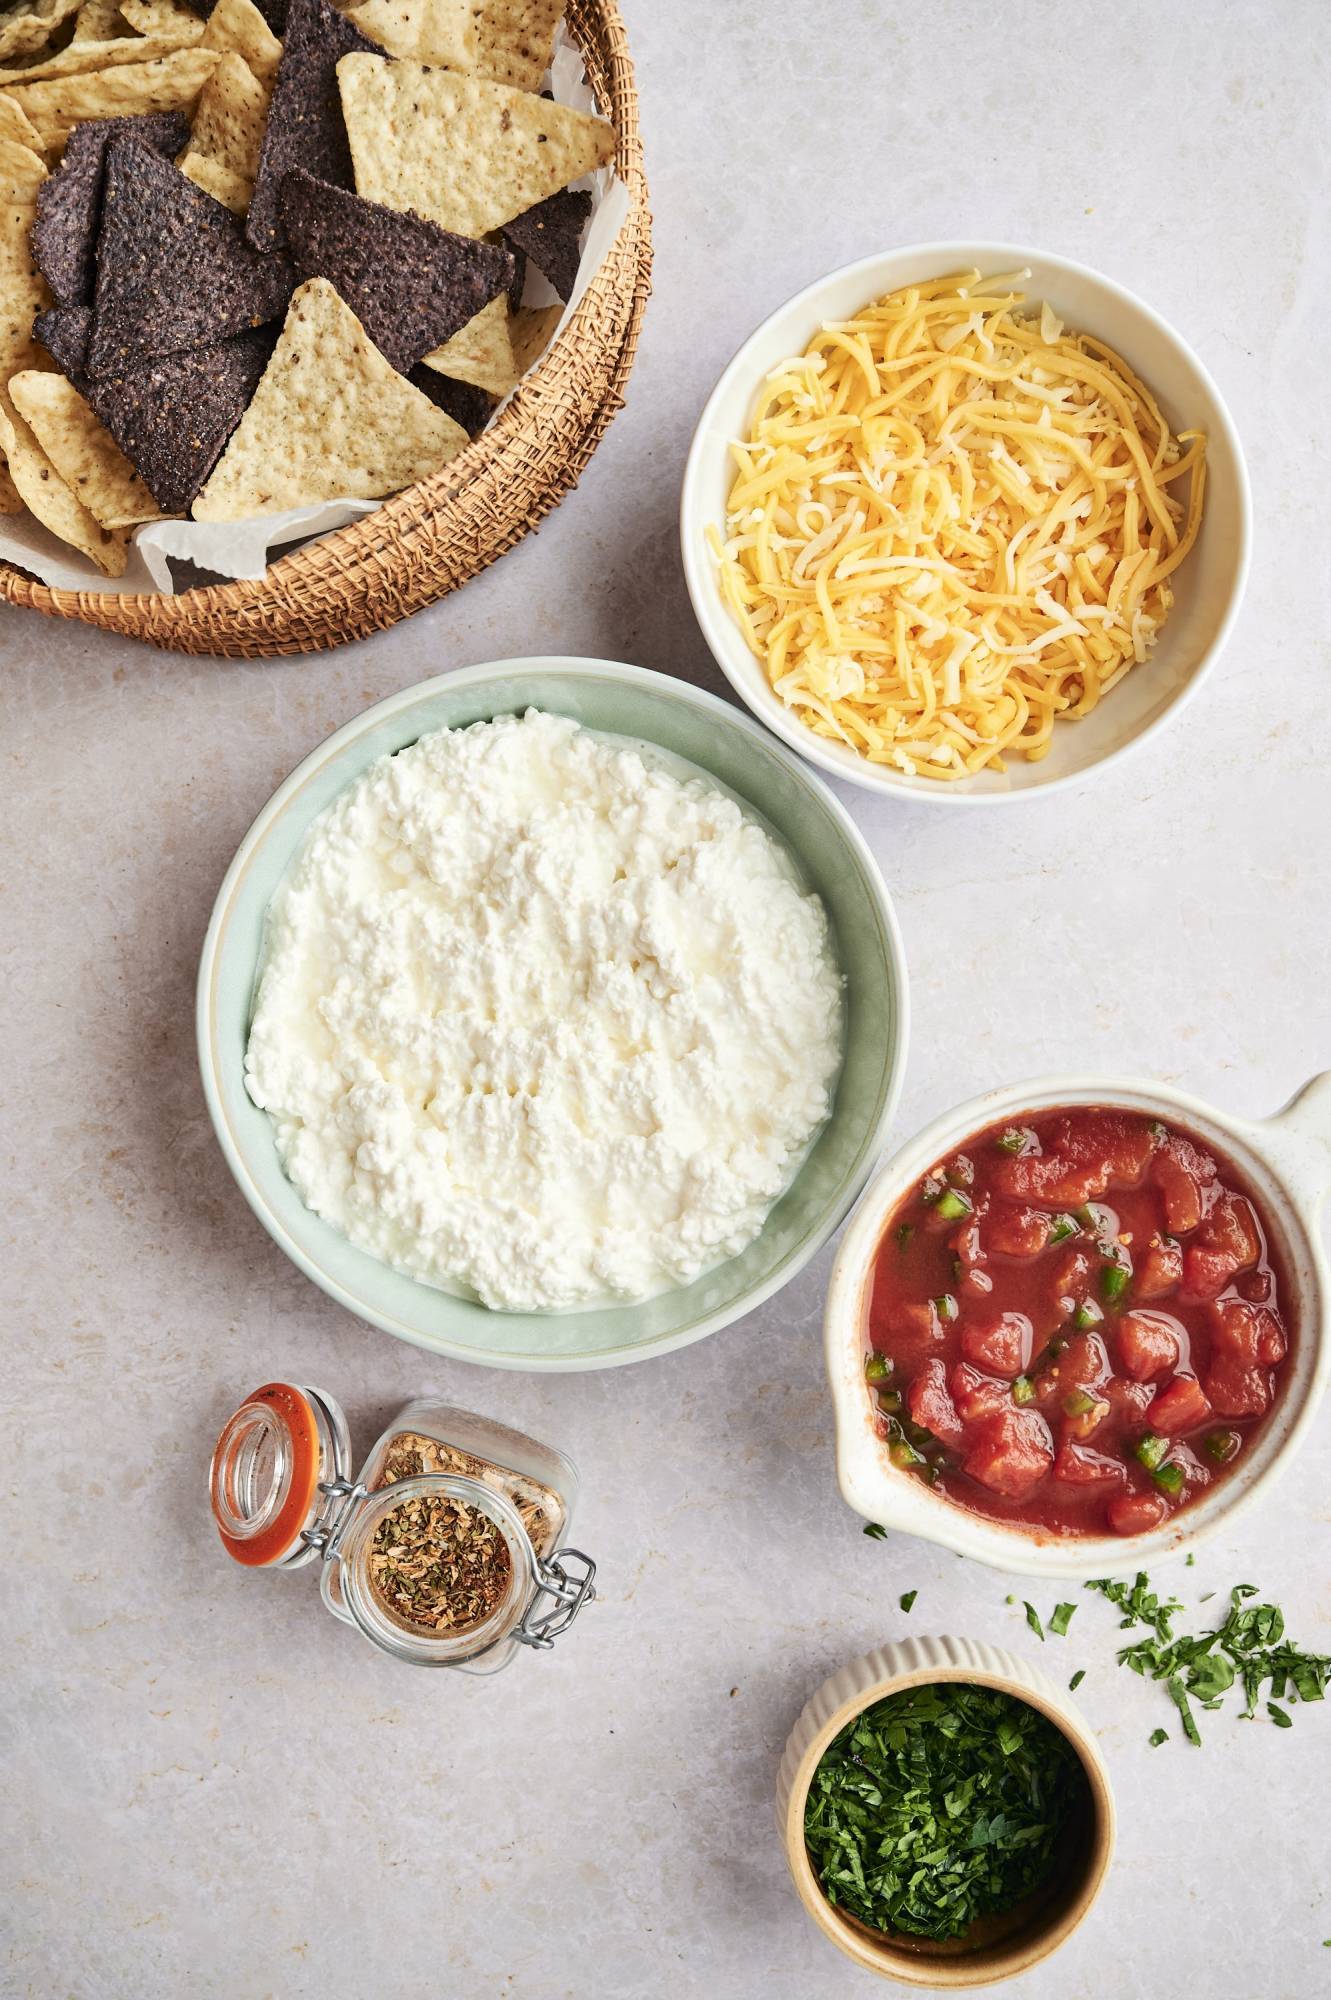 Ingredients for cottage cheese queso including cottage cheese, shredded cheddar cheese, tomatoes, green chilies, and taco seasoning.